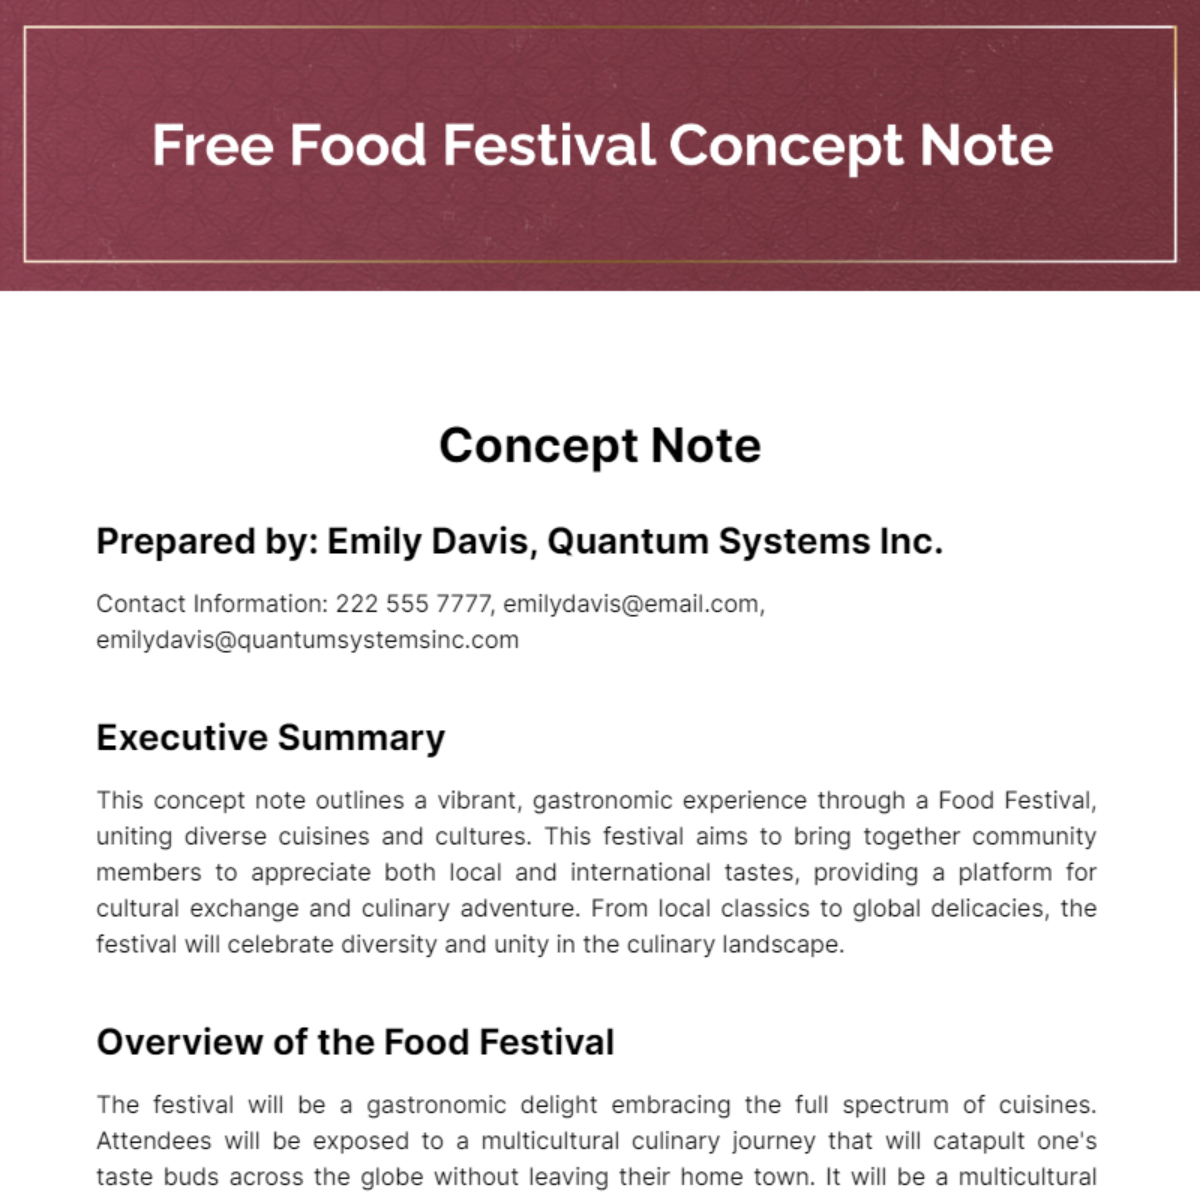 Free Food Festival Concept Note Template